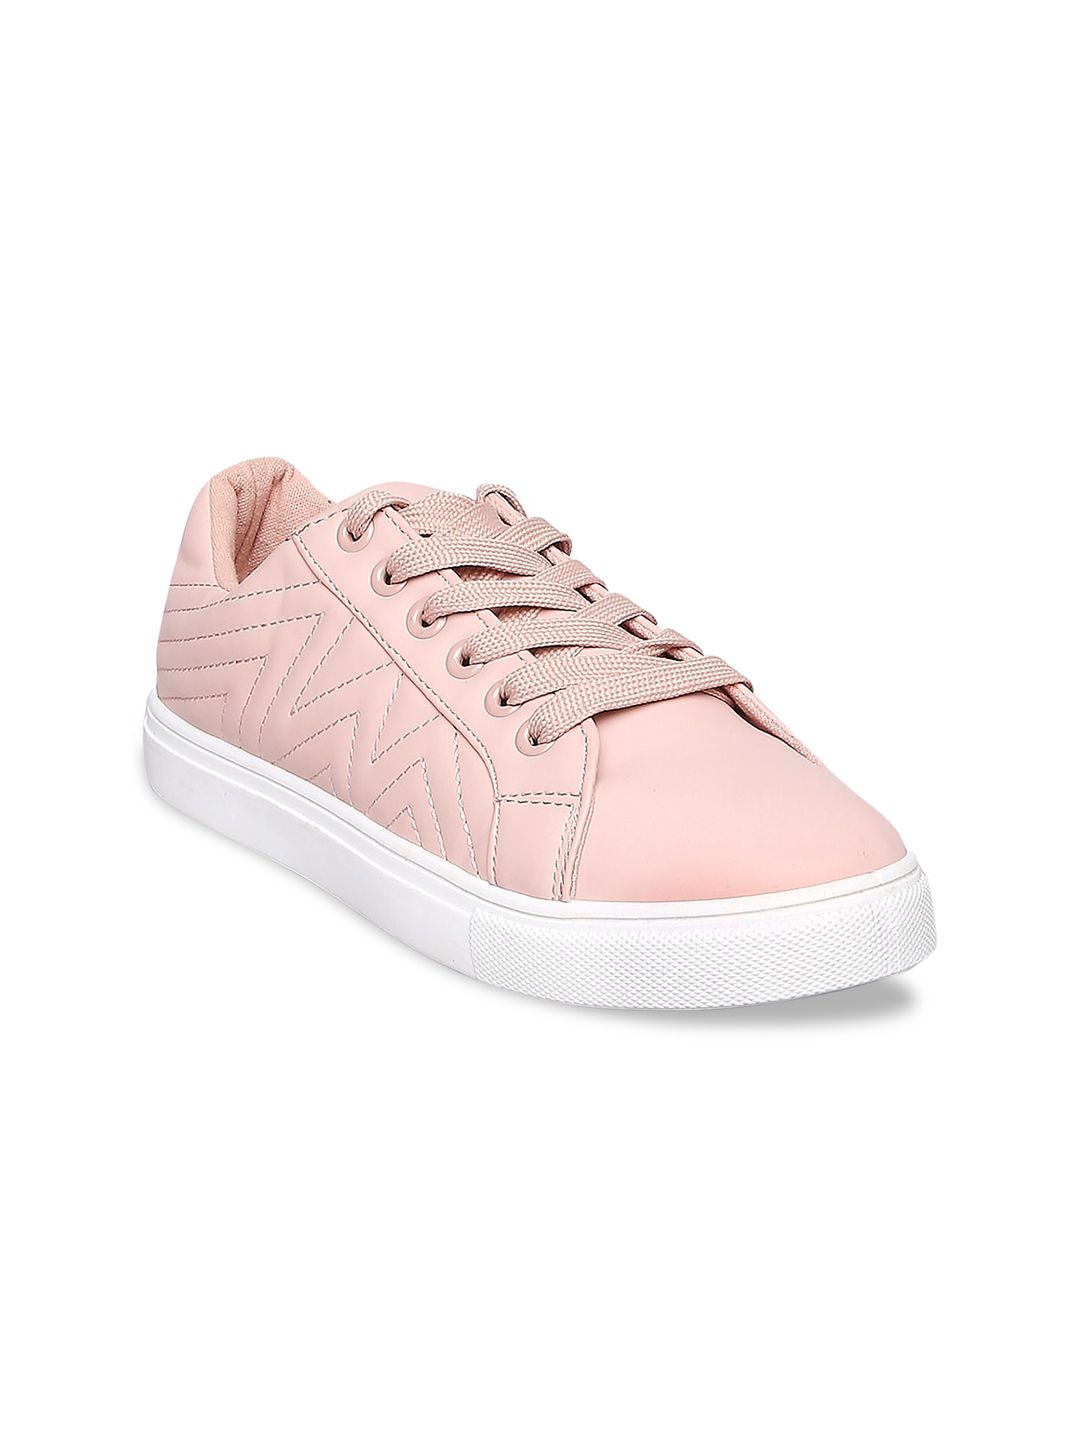 Forever Glam by Pantaloons Women Pink Woven Design Leather Sneakers Price in India